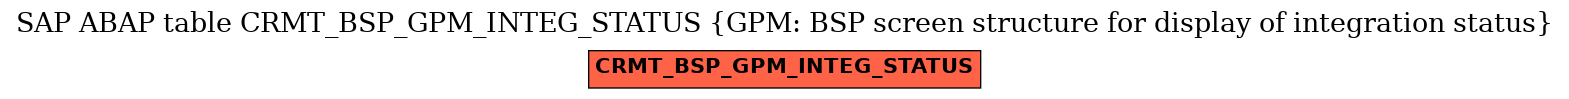 E-R Diagram for table CRMT_BSP_GPM_INTEG_STATUS (GPM: BSP screen structure for display of integration status)